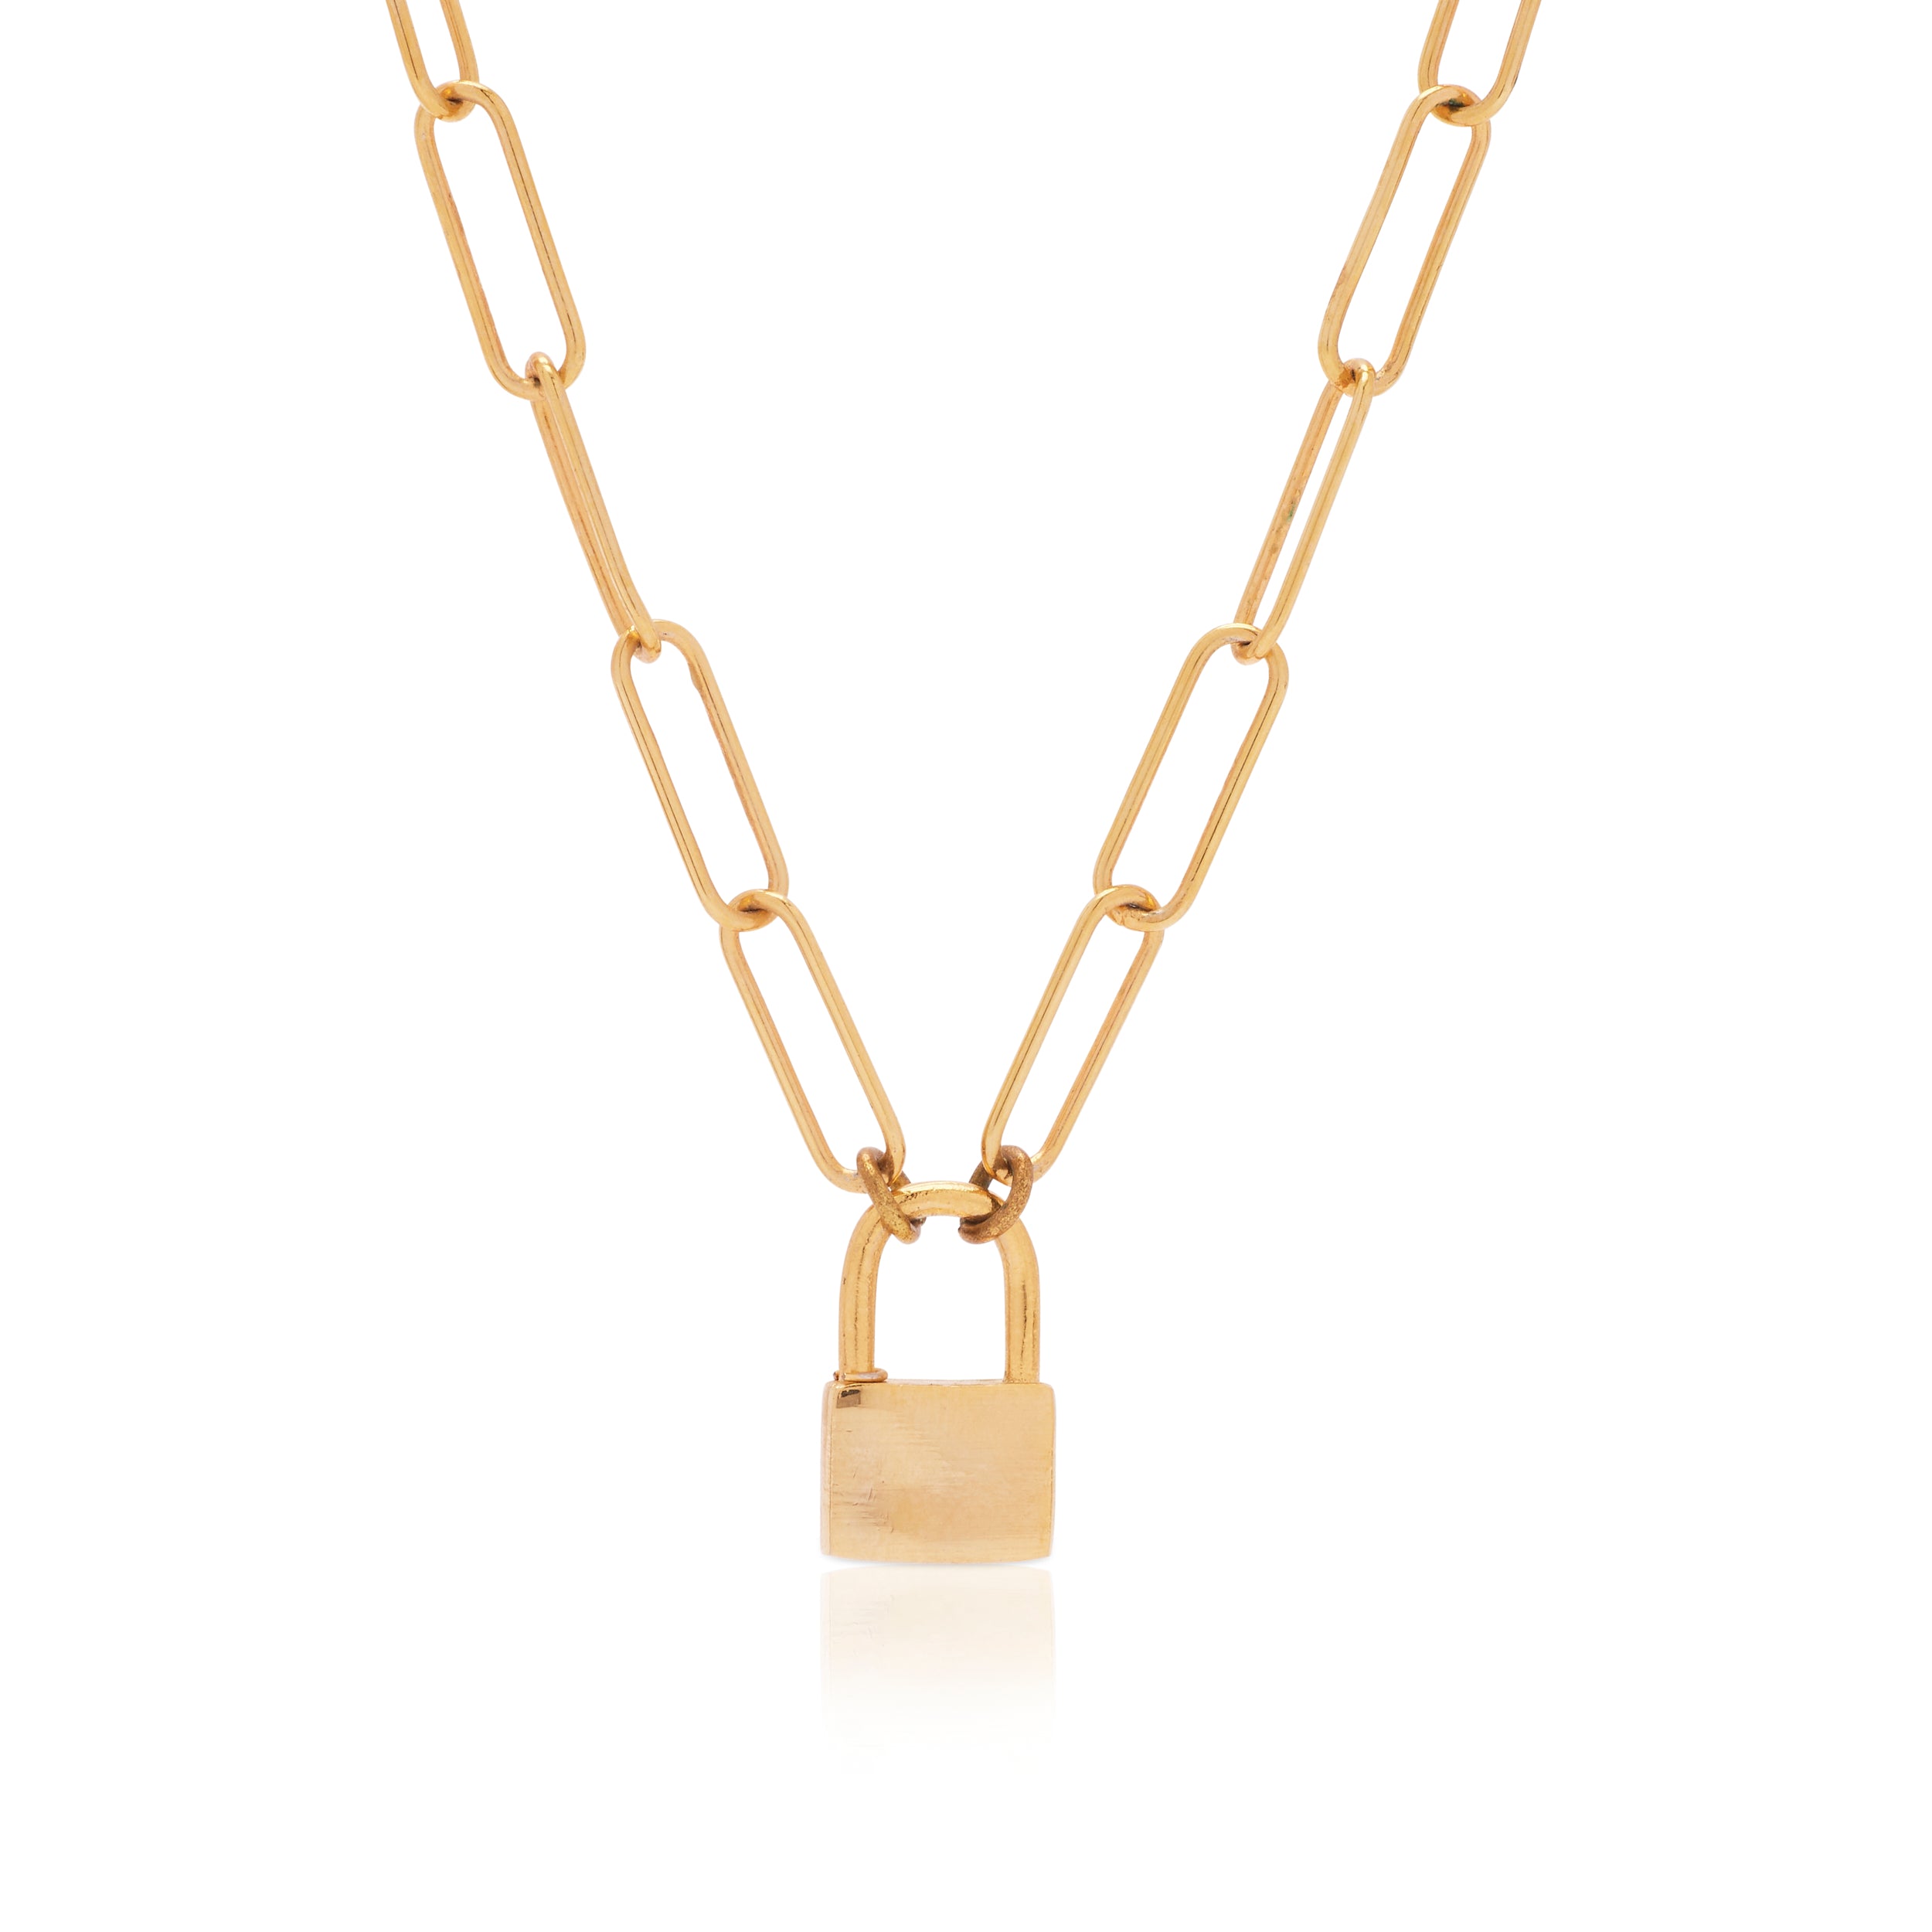 Gold Lock Charm Necklace